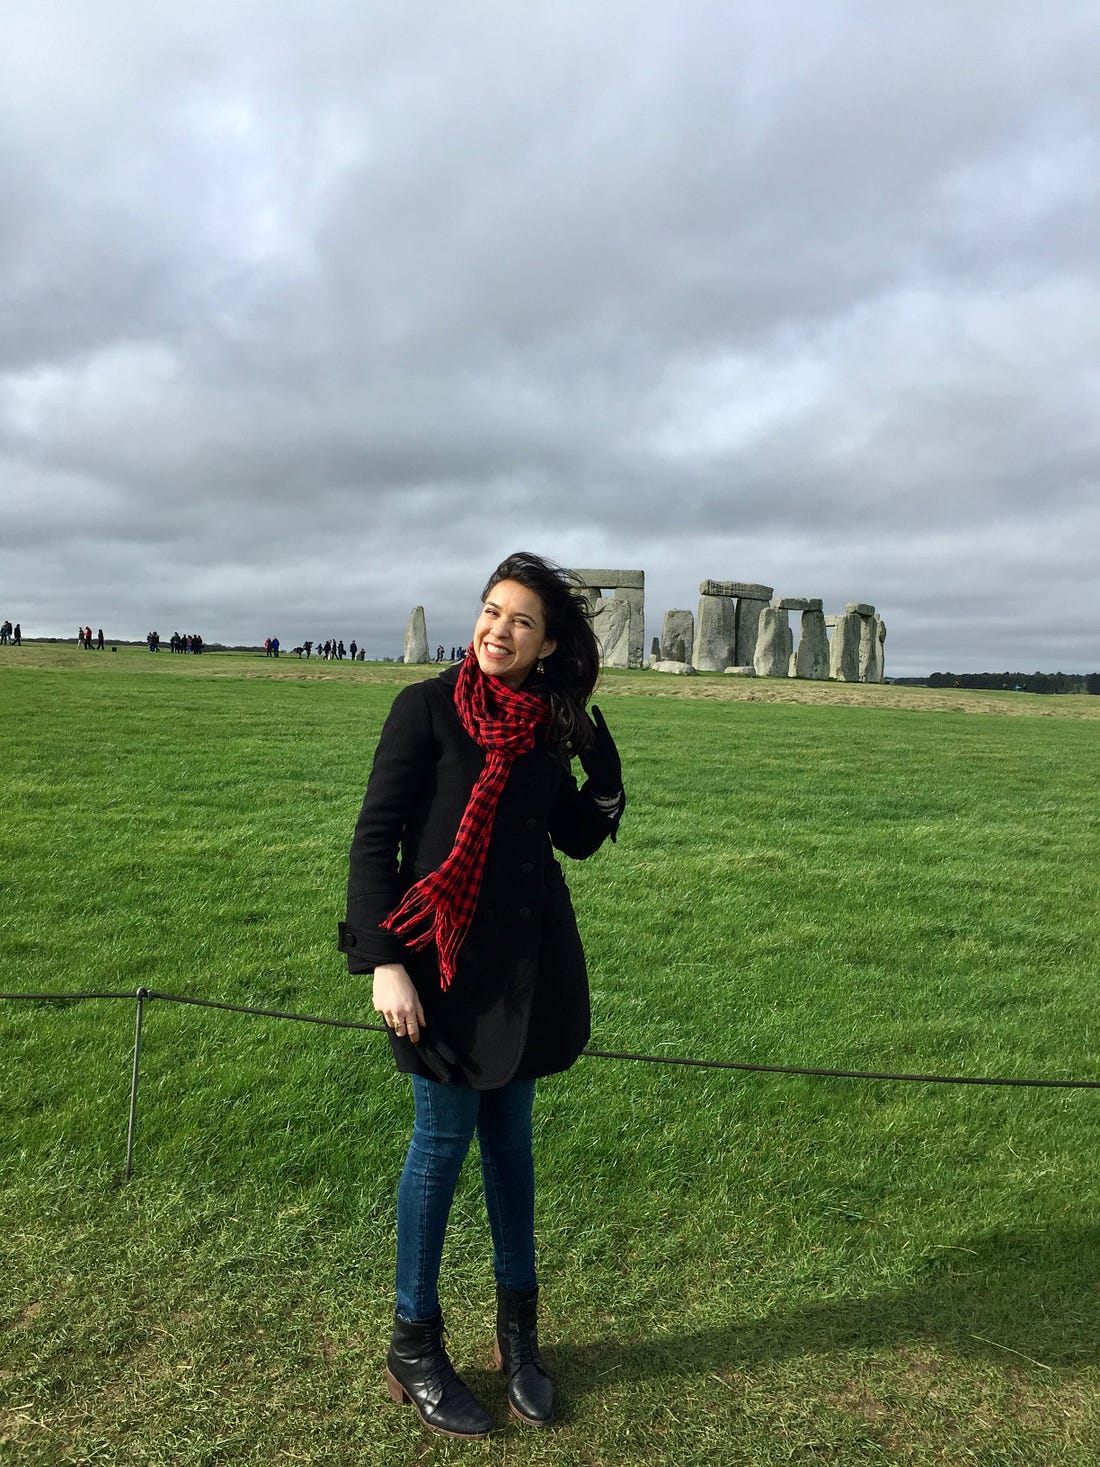 My first solo trip was to England and I got to visit Stonehenge